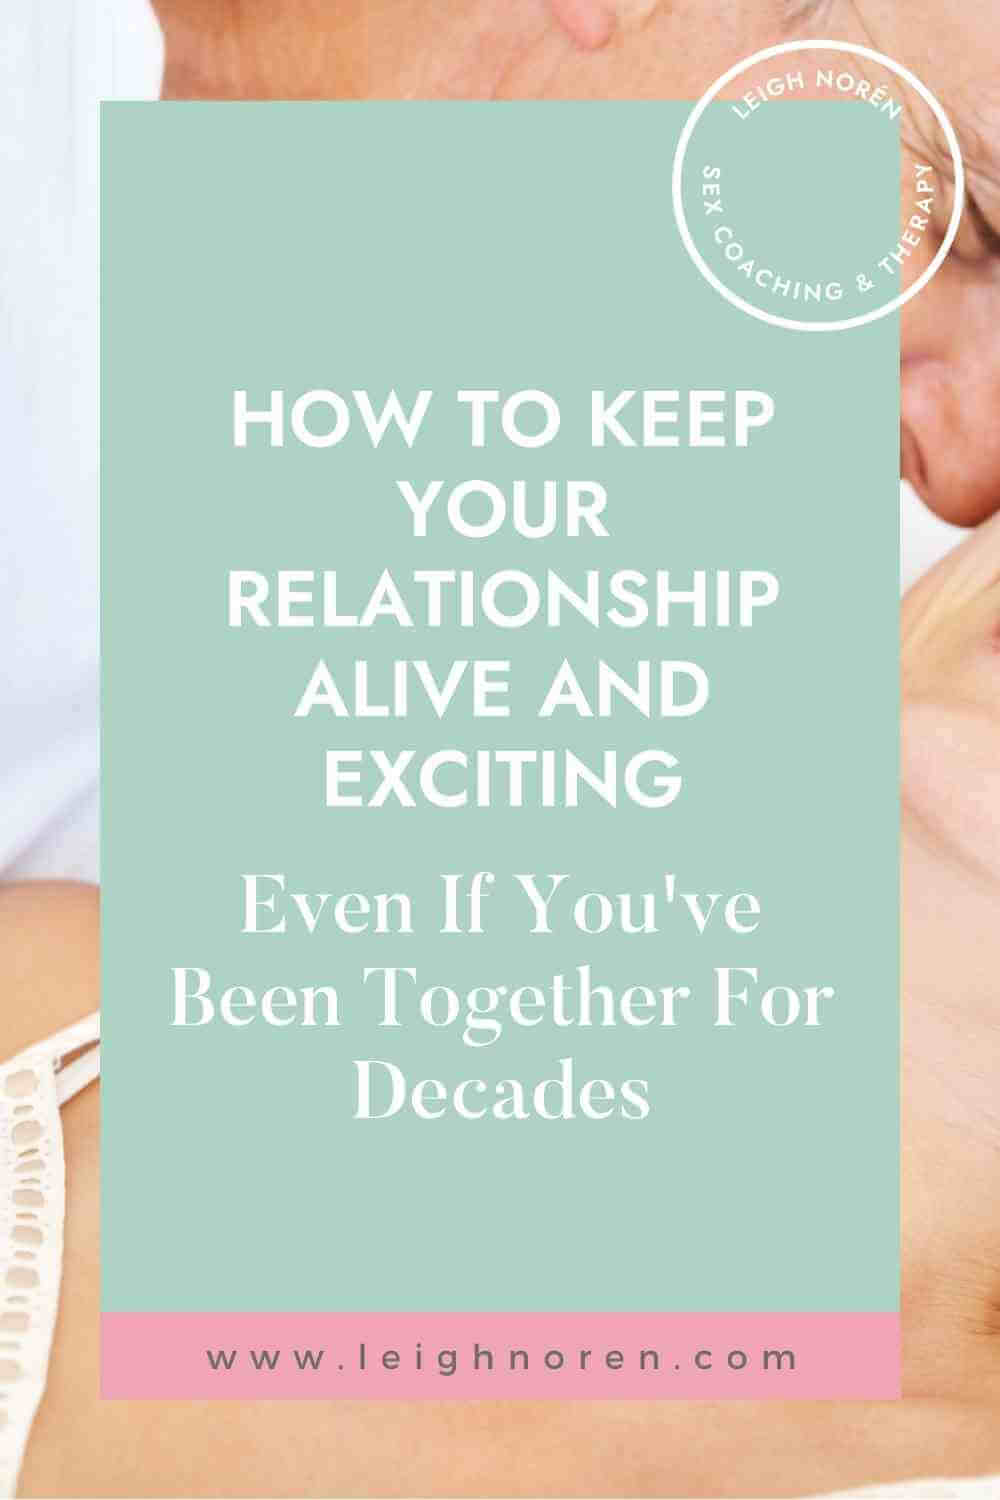 How To Keep Your Relationship Alive And Exciting Even If You've Been Together For Decades